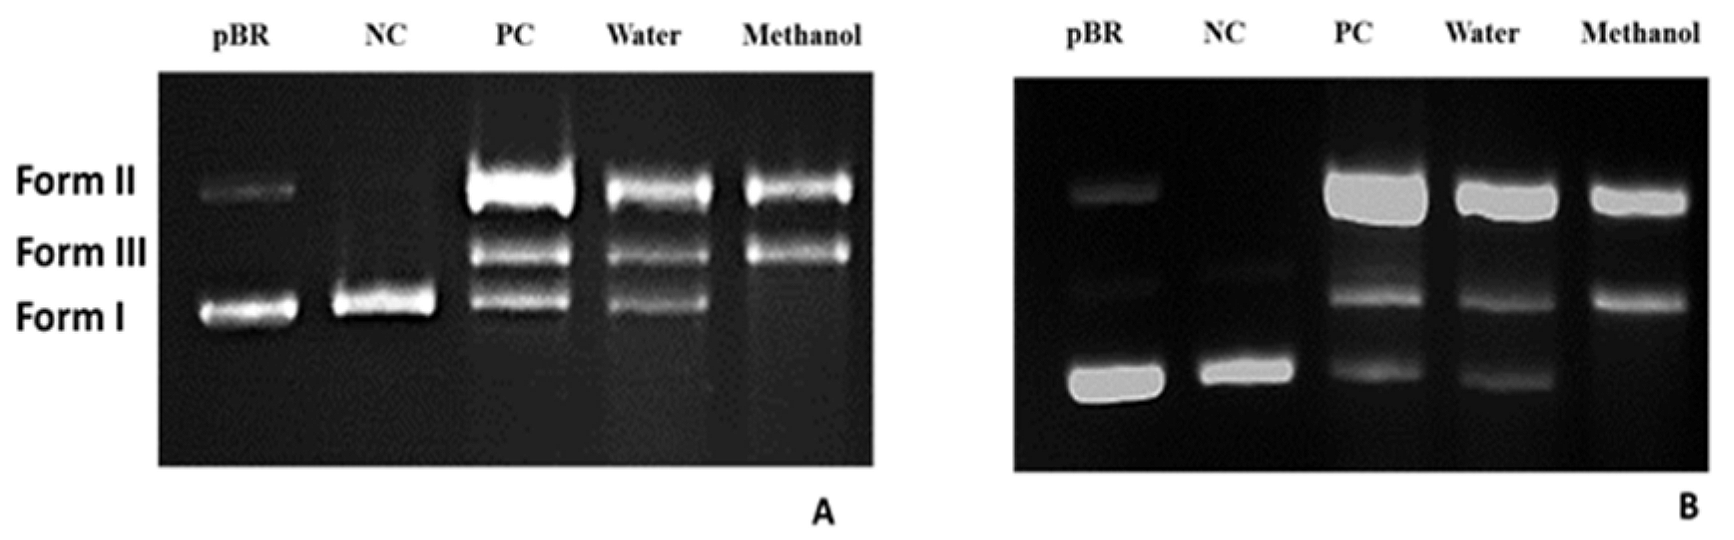 Figure 4. Electrophoretogram of plasmid DNA after ultraviolet photolysis of H2O2 in the presence and absence of the plant WRE and MRE.